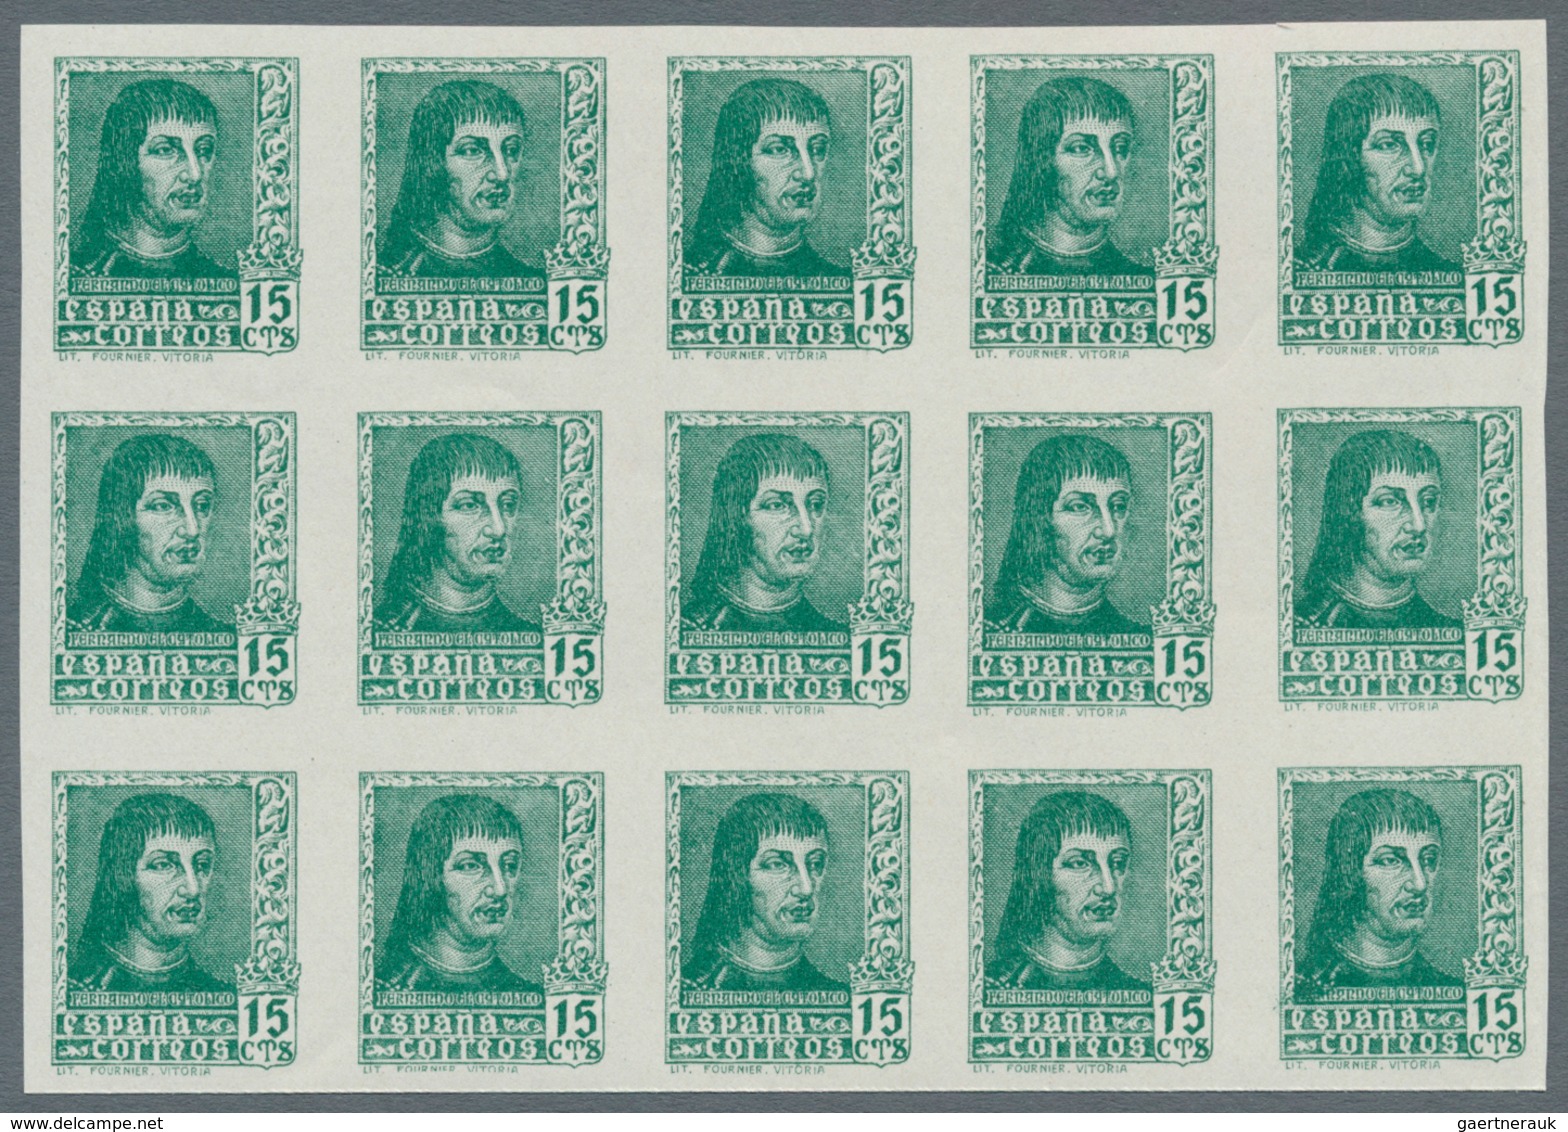 Spanien: 1938, Ferdinand II. five different stamps incl. both imprints of 30c. in IMPERFORATE blocks